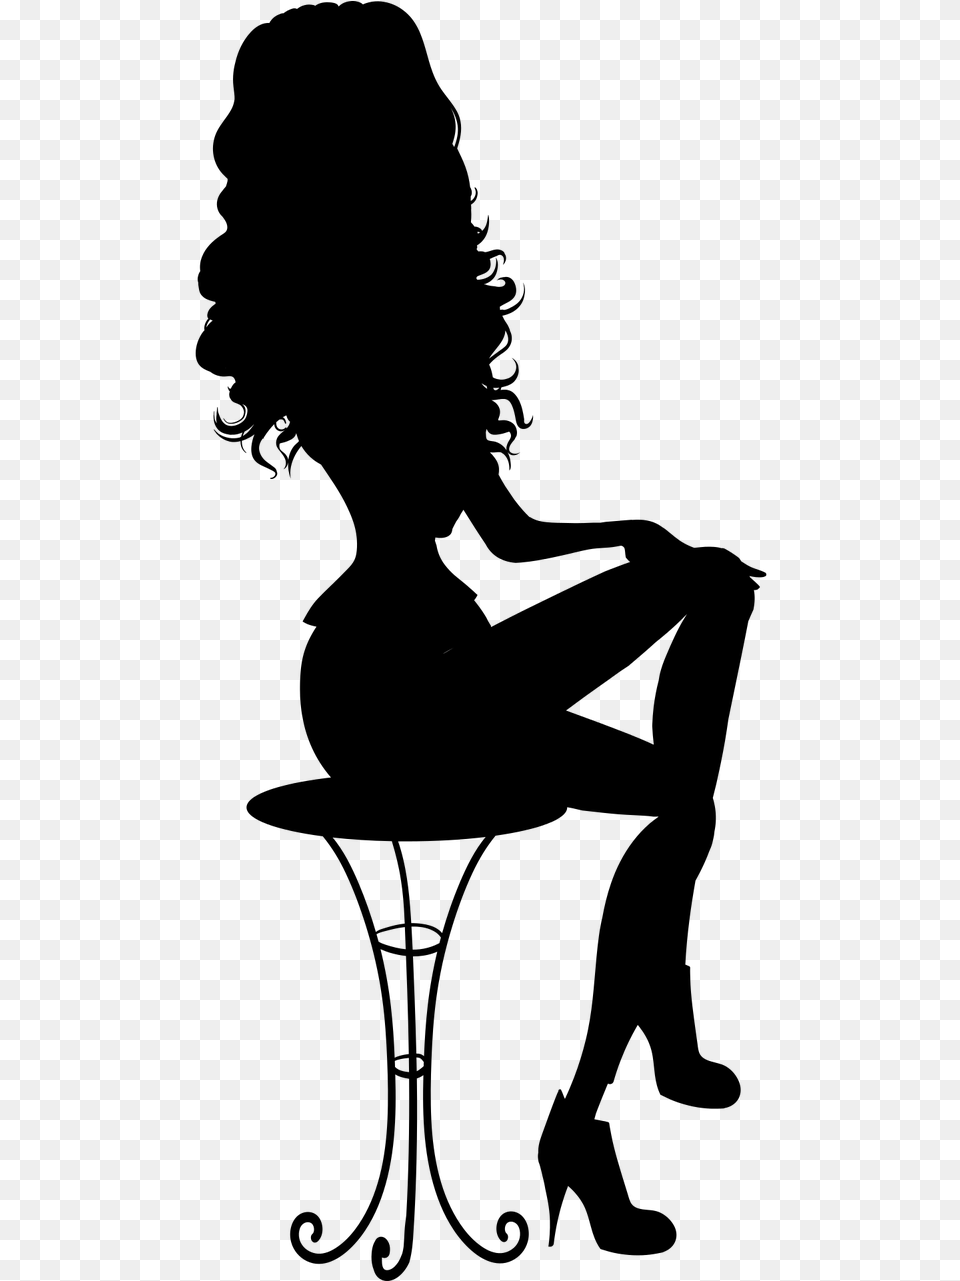 Woman Sitting Down Silhouette, Gray Free Transparent Png